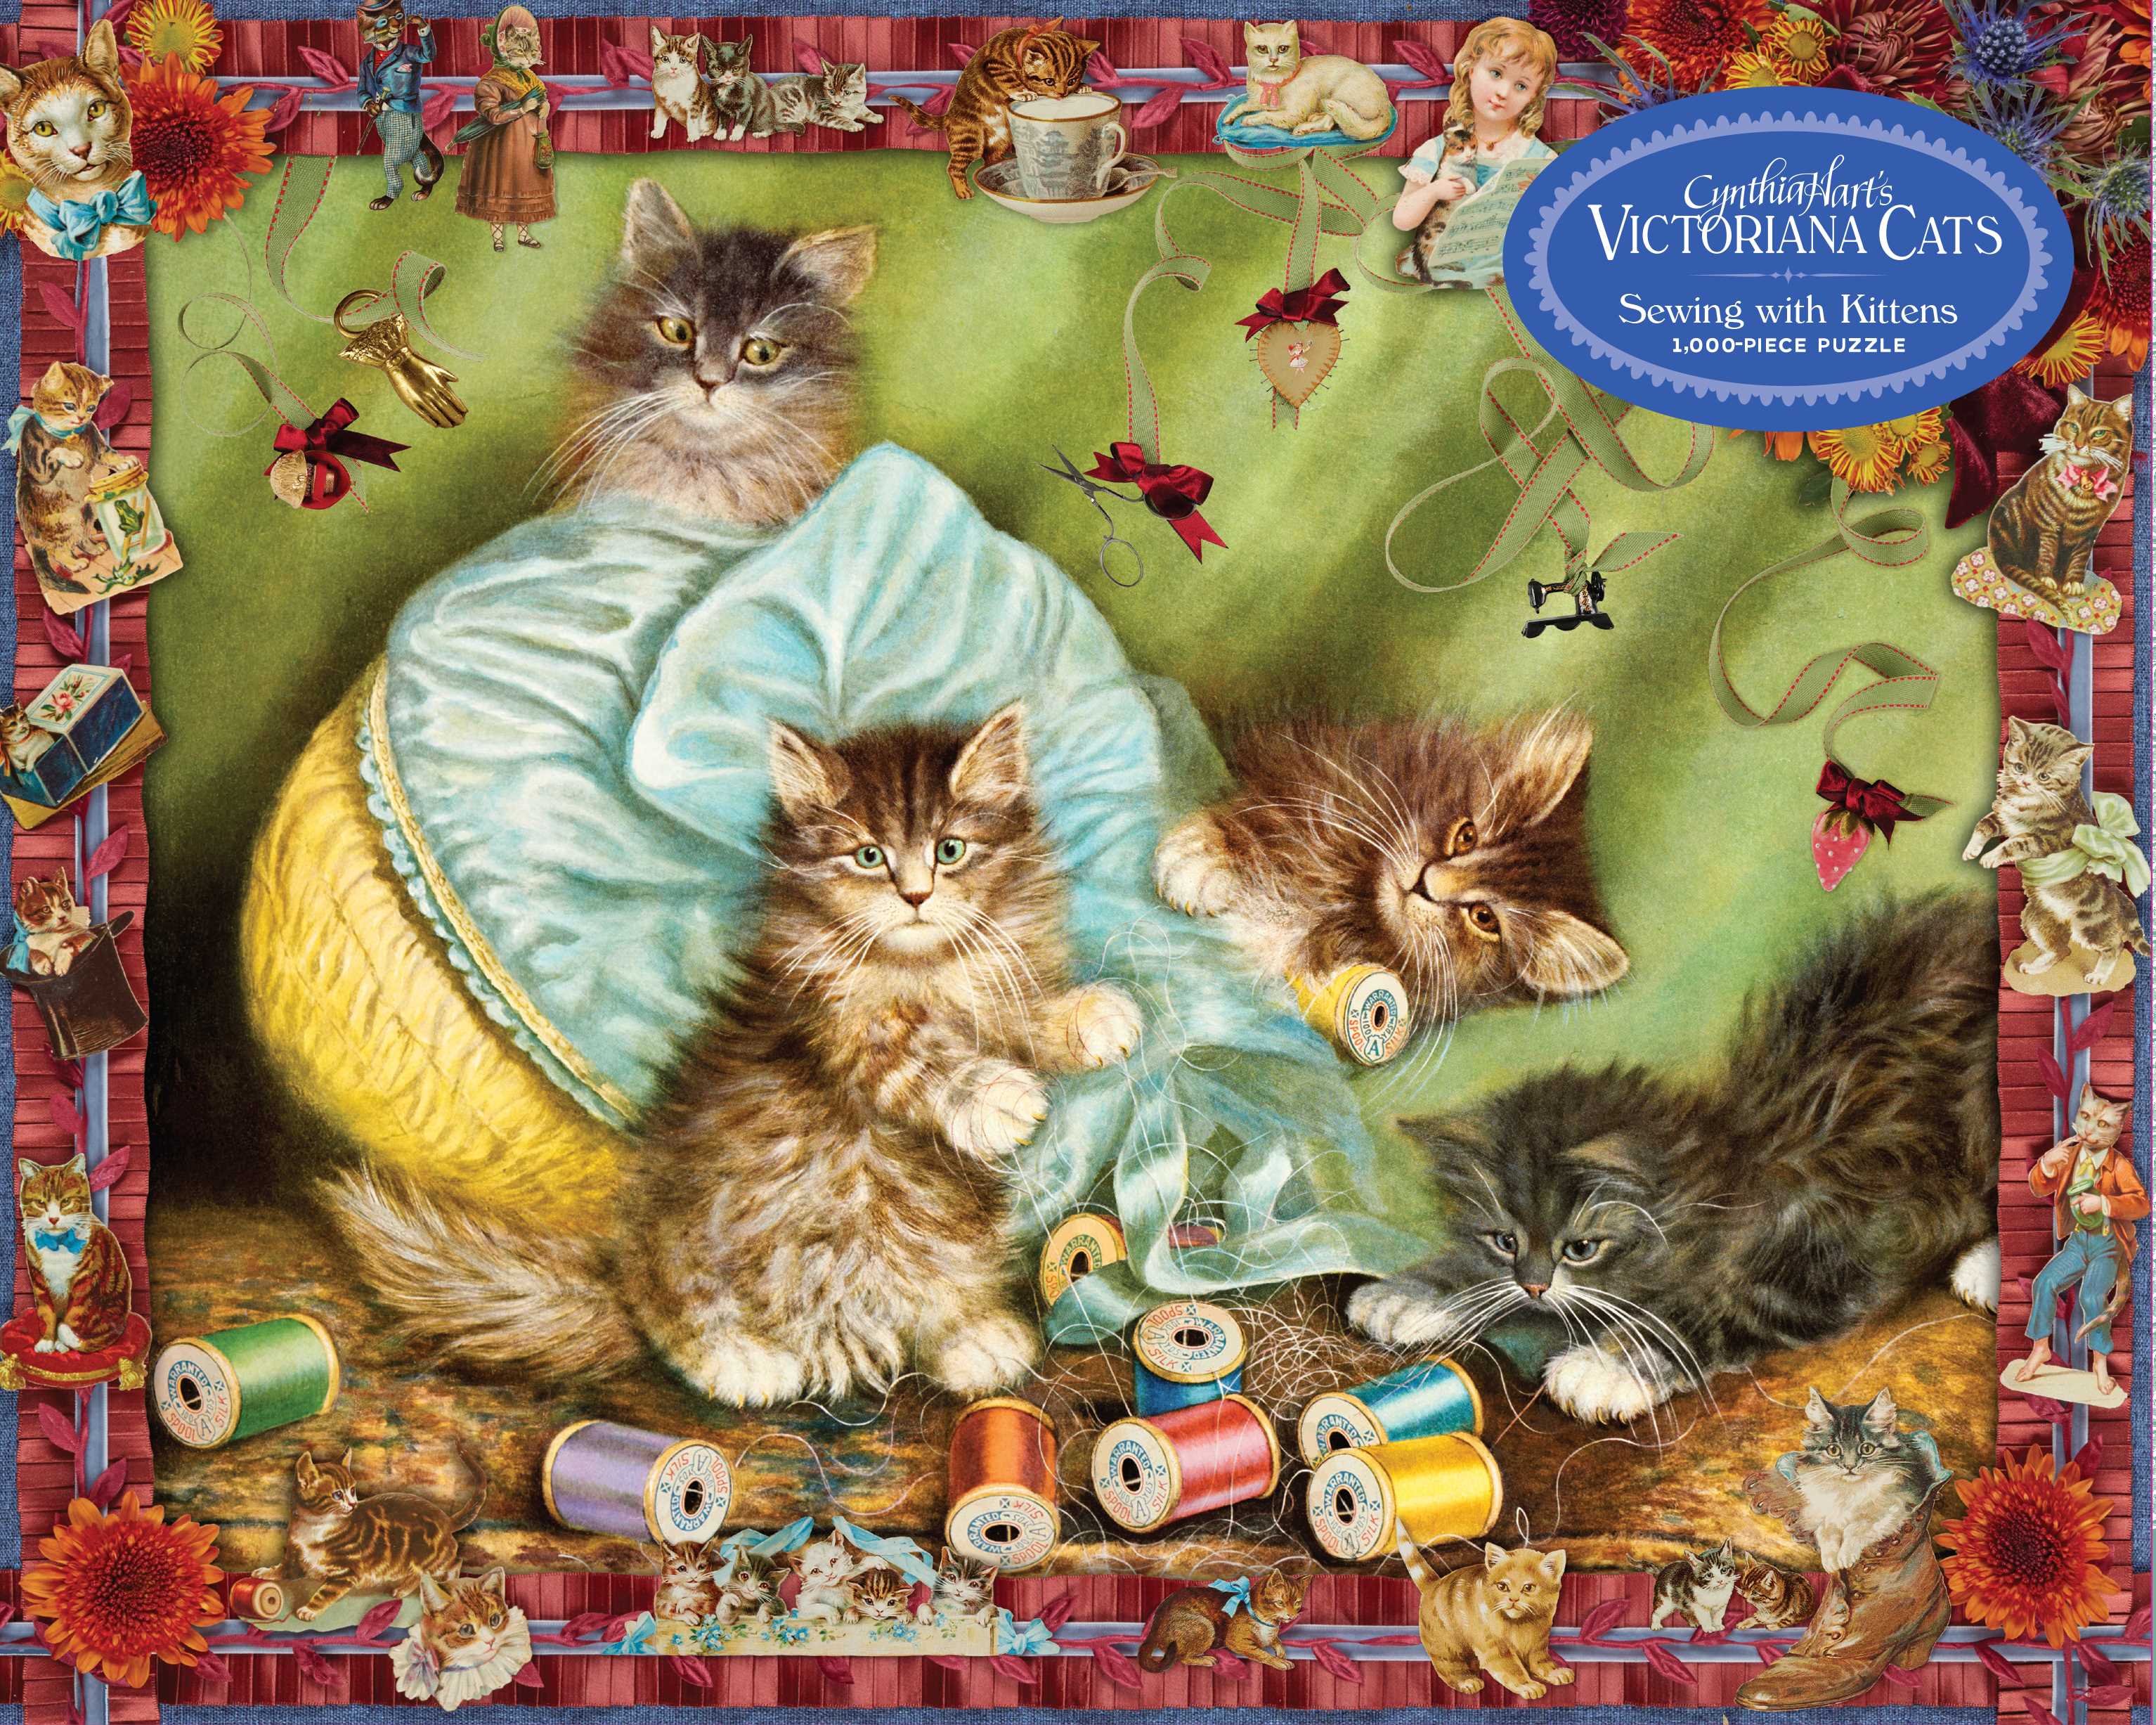 Sewing with Kittens 1,000-Piece Puzzle (Cynthia Hart's Victoriana Cats)